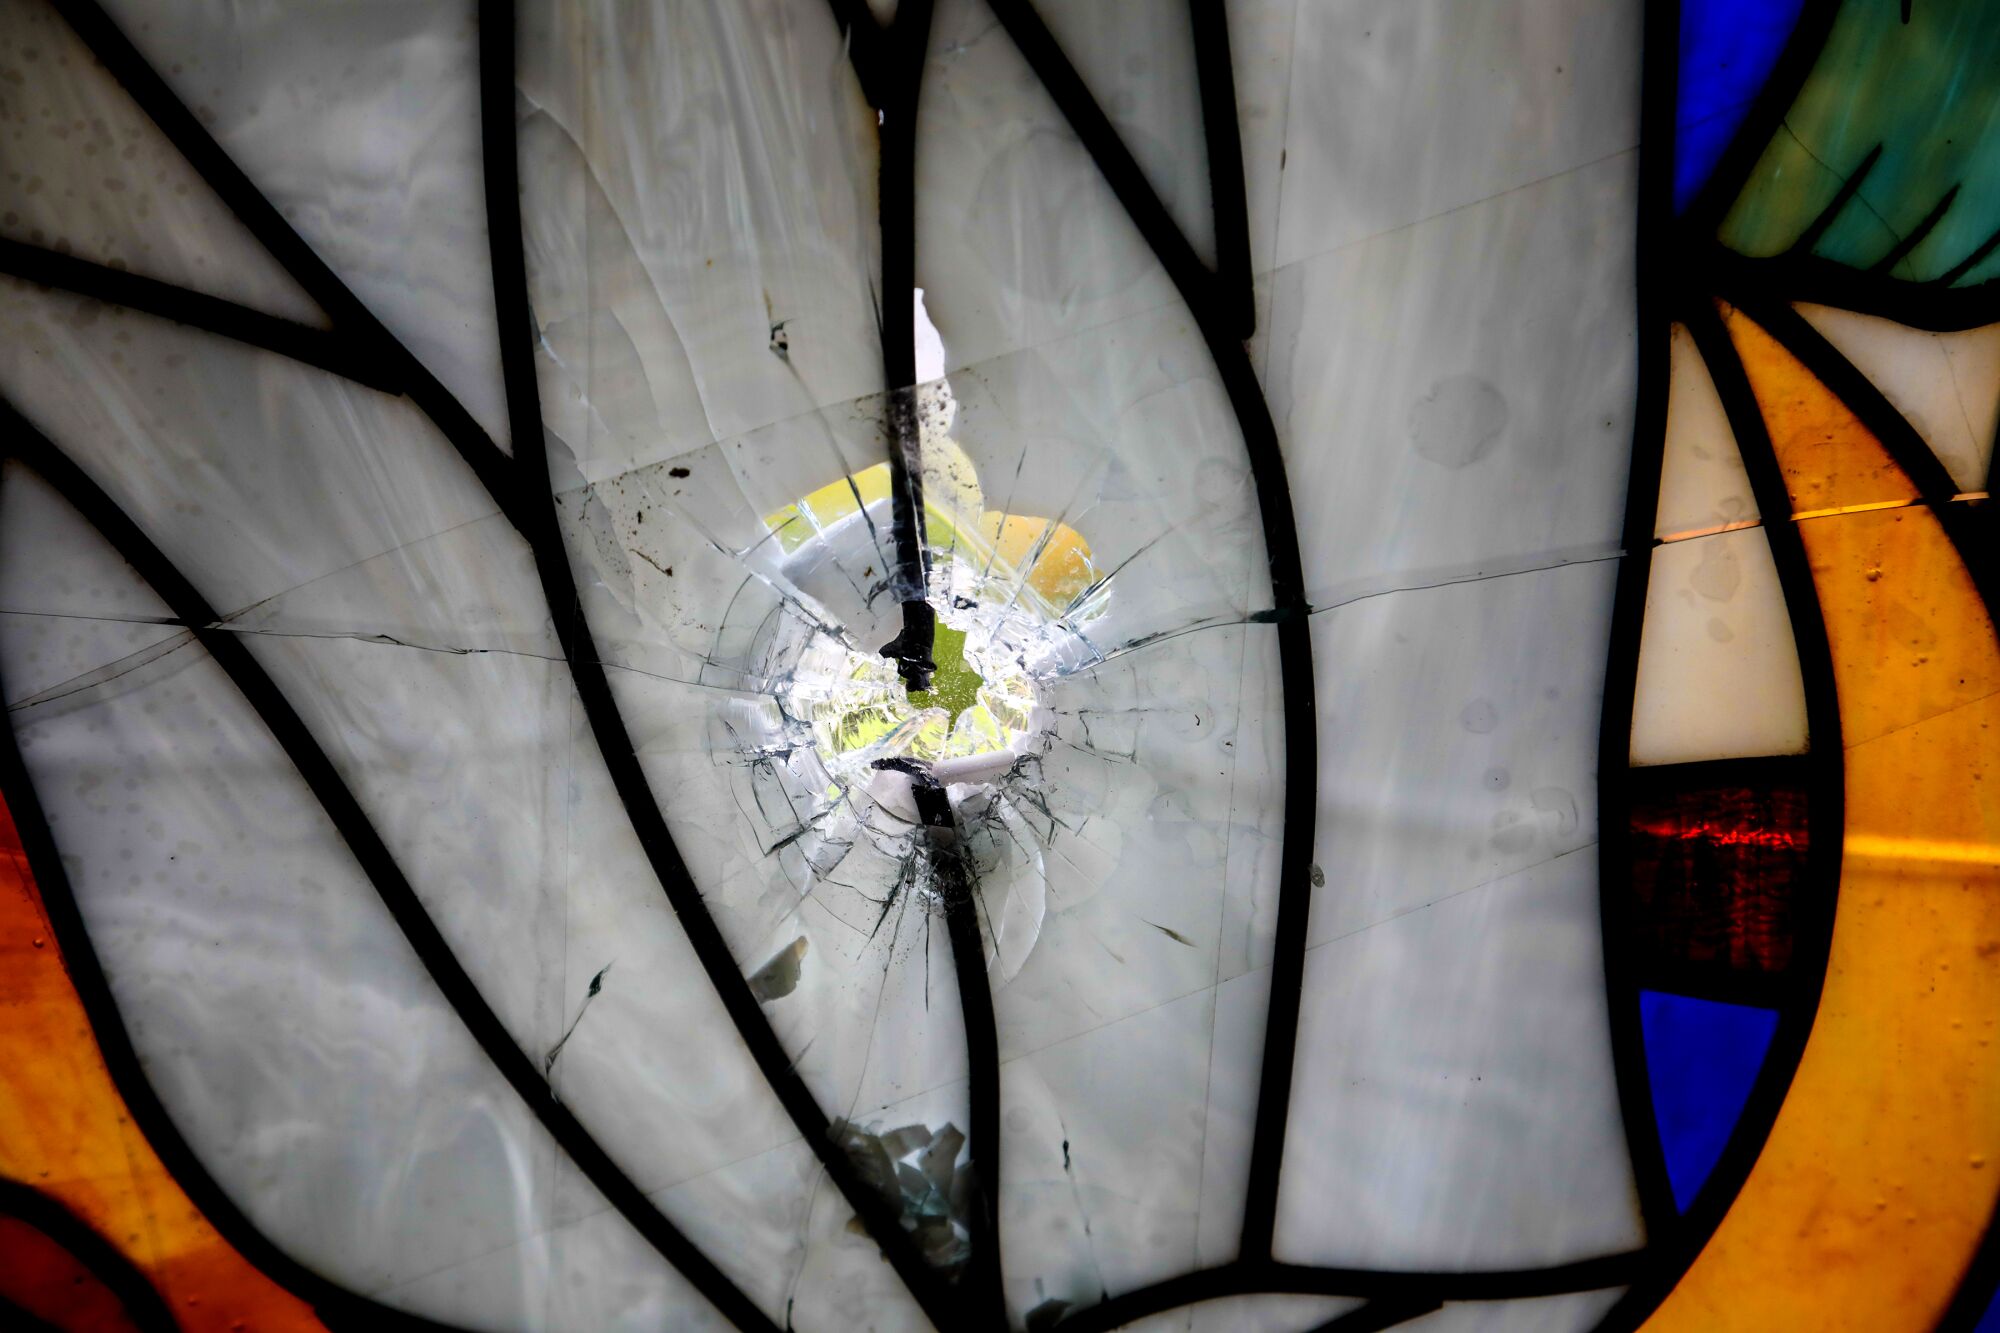 Bullet holes shattered the stained glass windows of the chapel of Parroquia Jesus de la Divina Misericordia, a Catholic church in Managua where student protesters took refuge in July 2018. The holes have been covered with new glass, but the signs of damage are preserved.